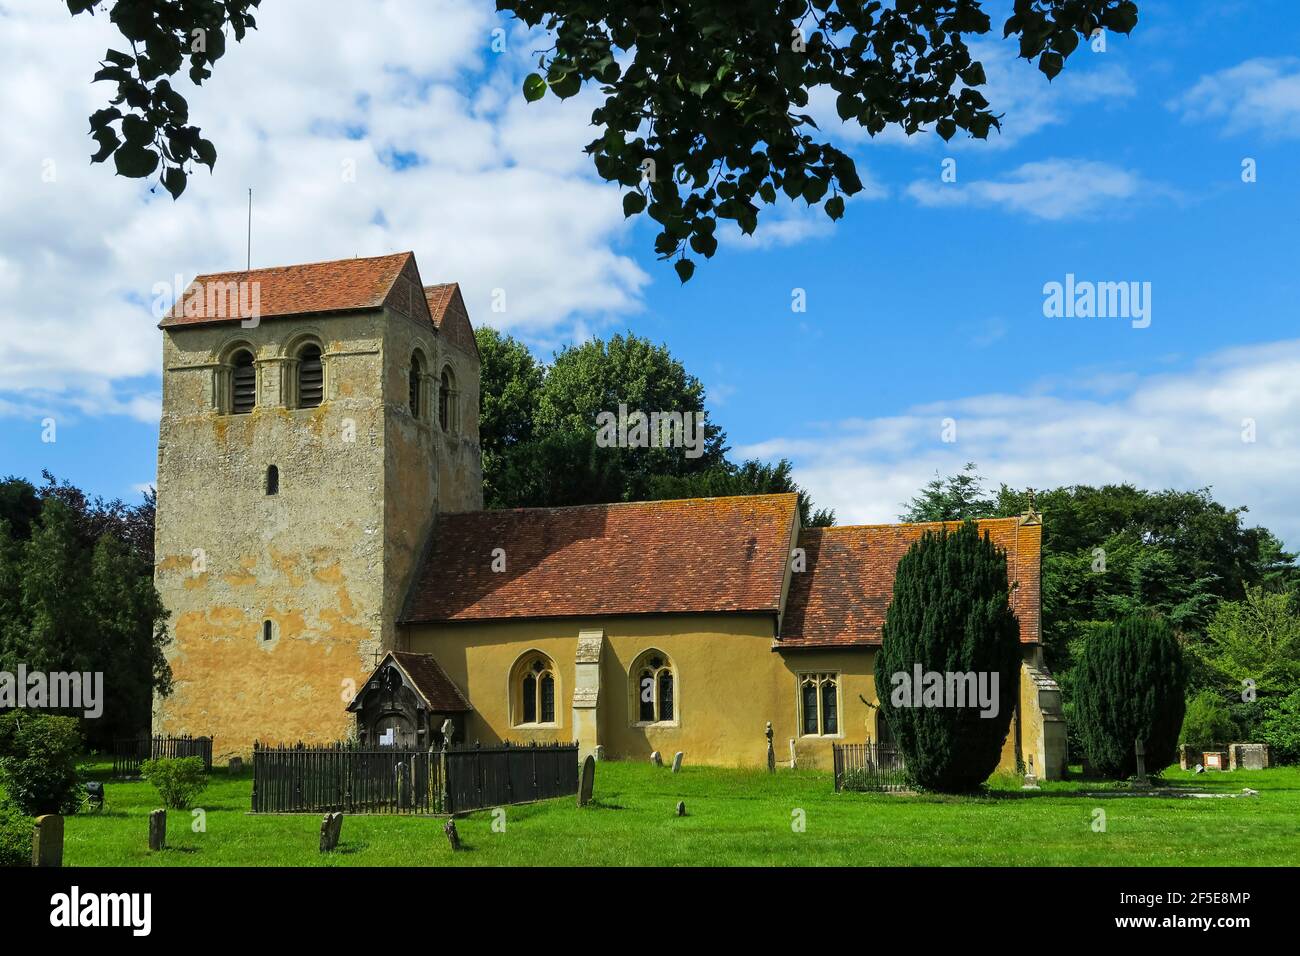 St Bartholomew's church with it's famous 12thC Norman Tower at Fingest in the Hambleden Valley; Fingest, Buckinghamshire, UK Stock Photo